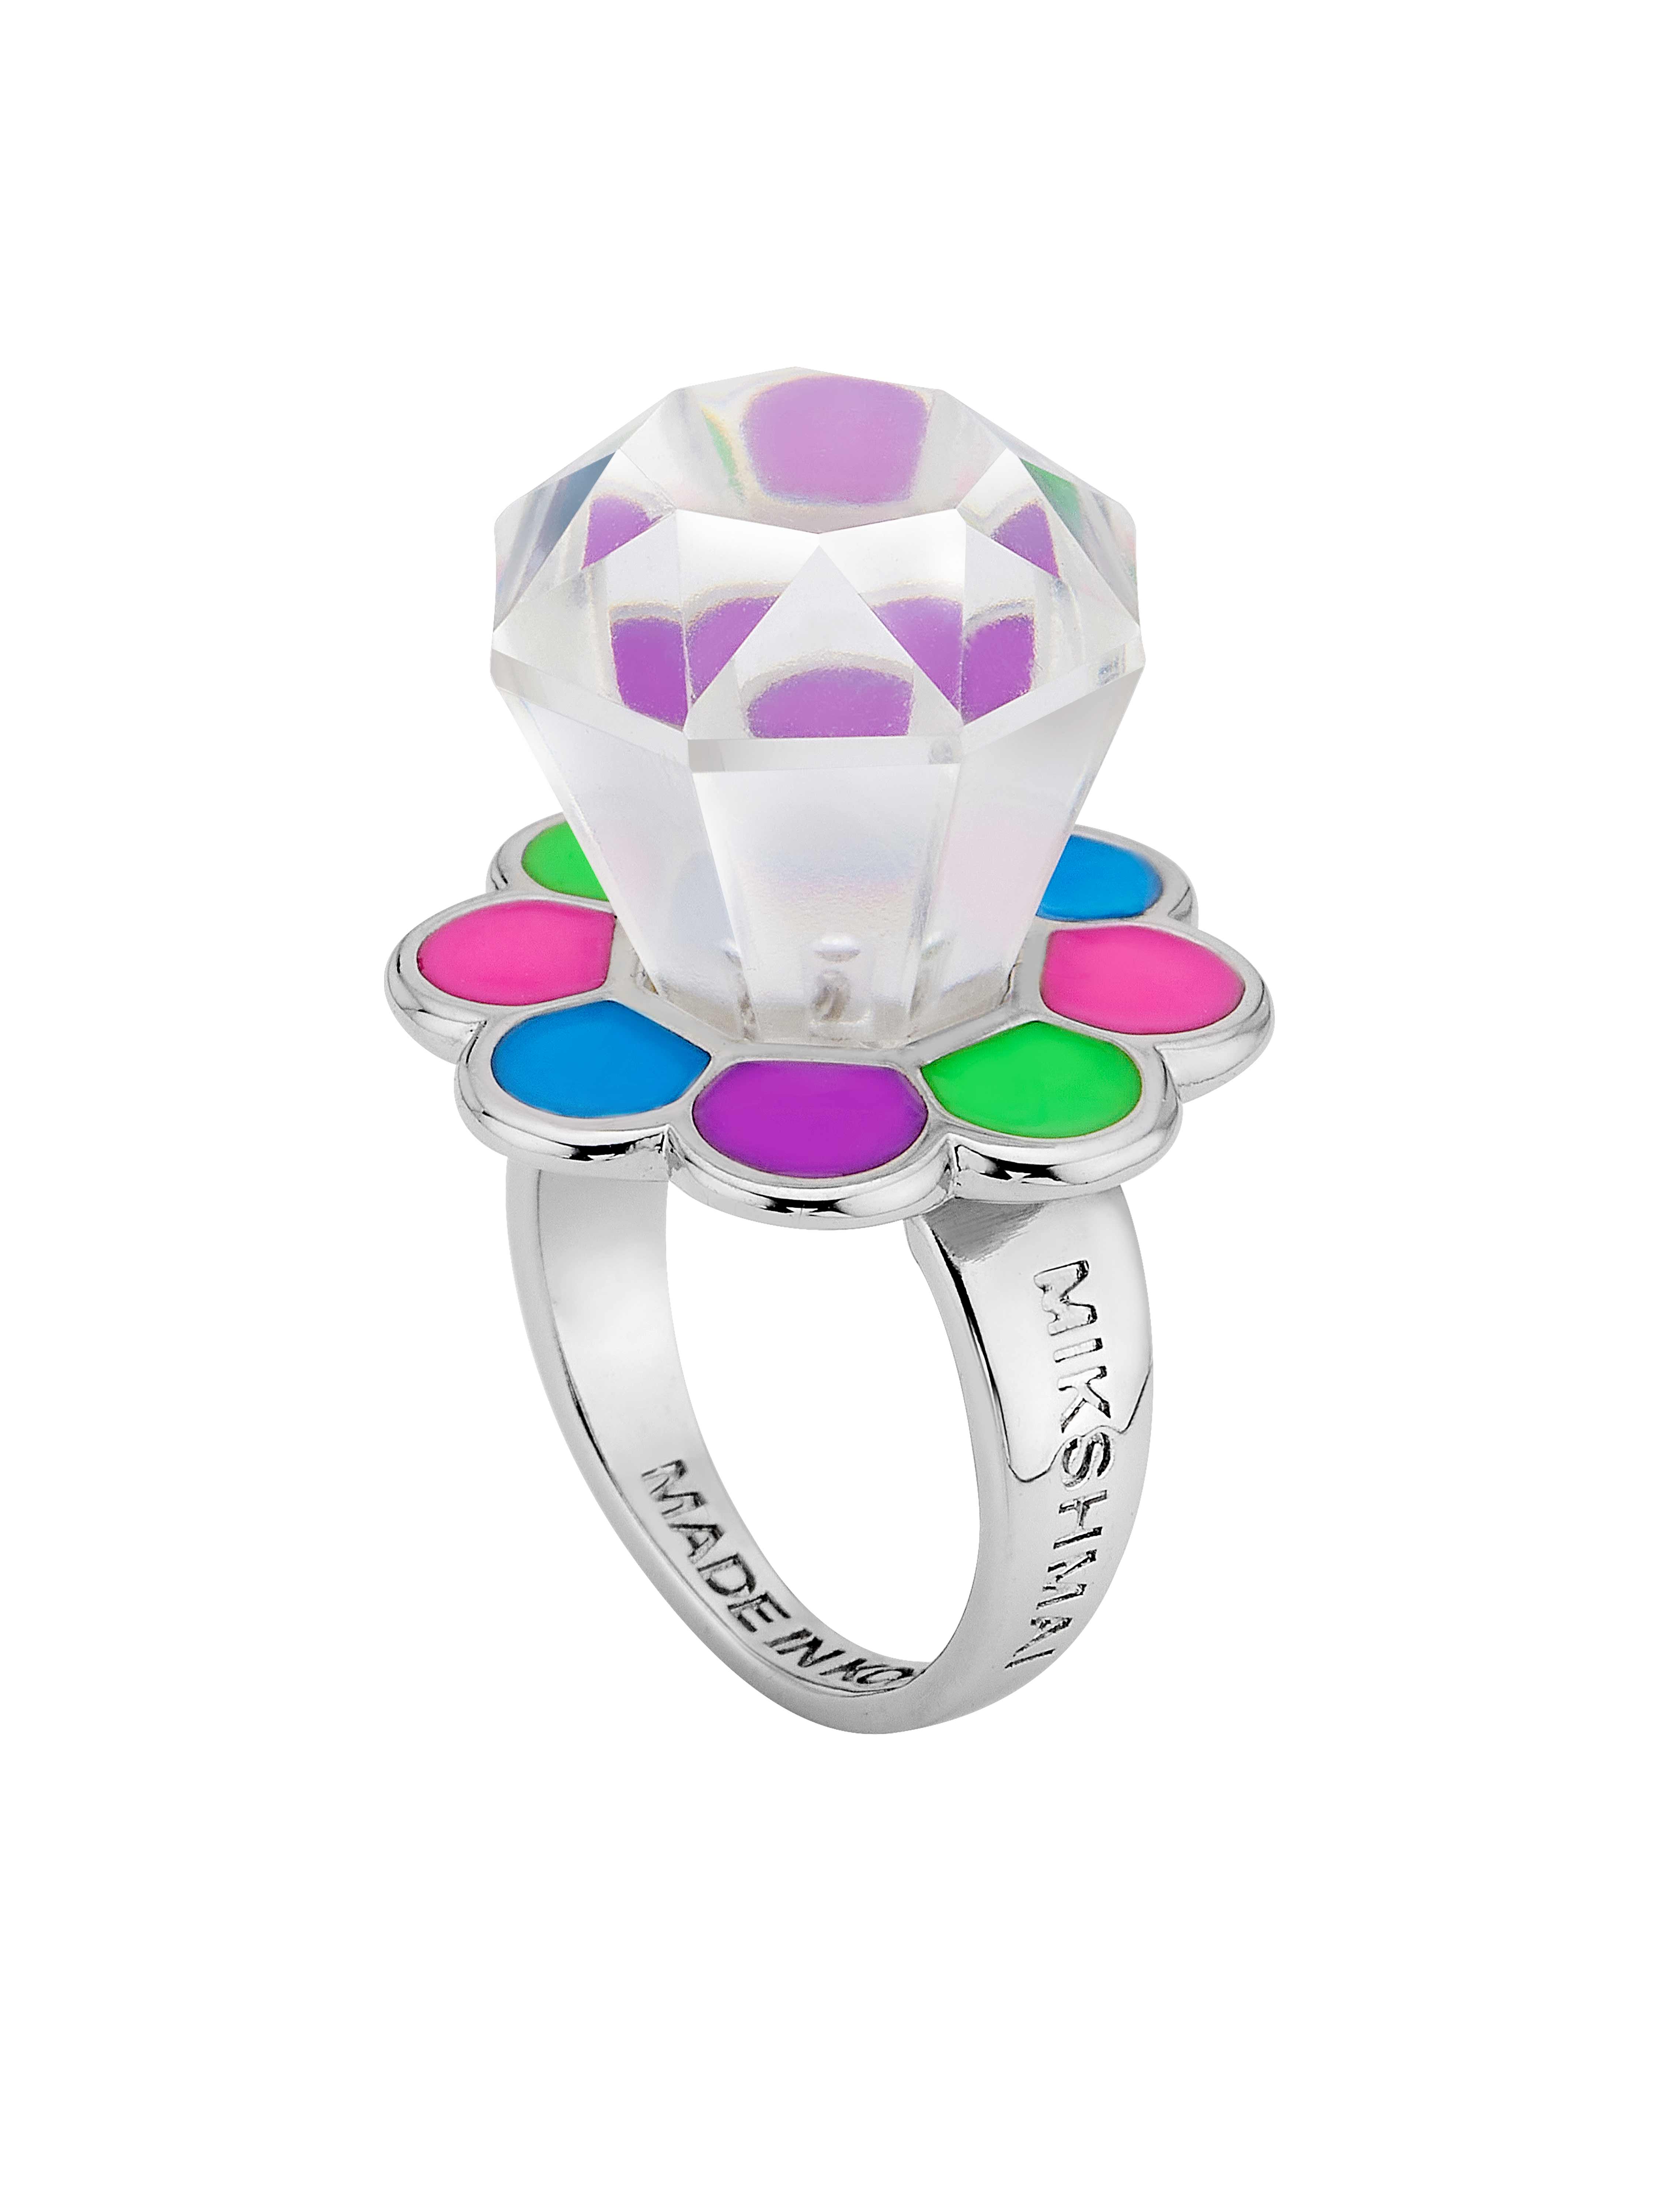 BLOOM CANDY RING